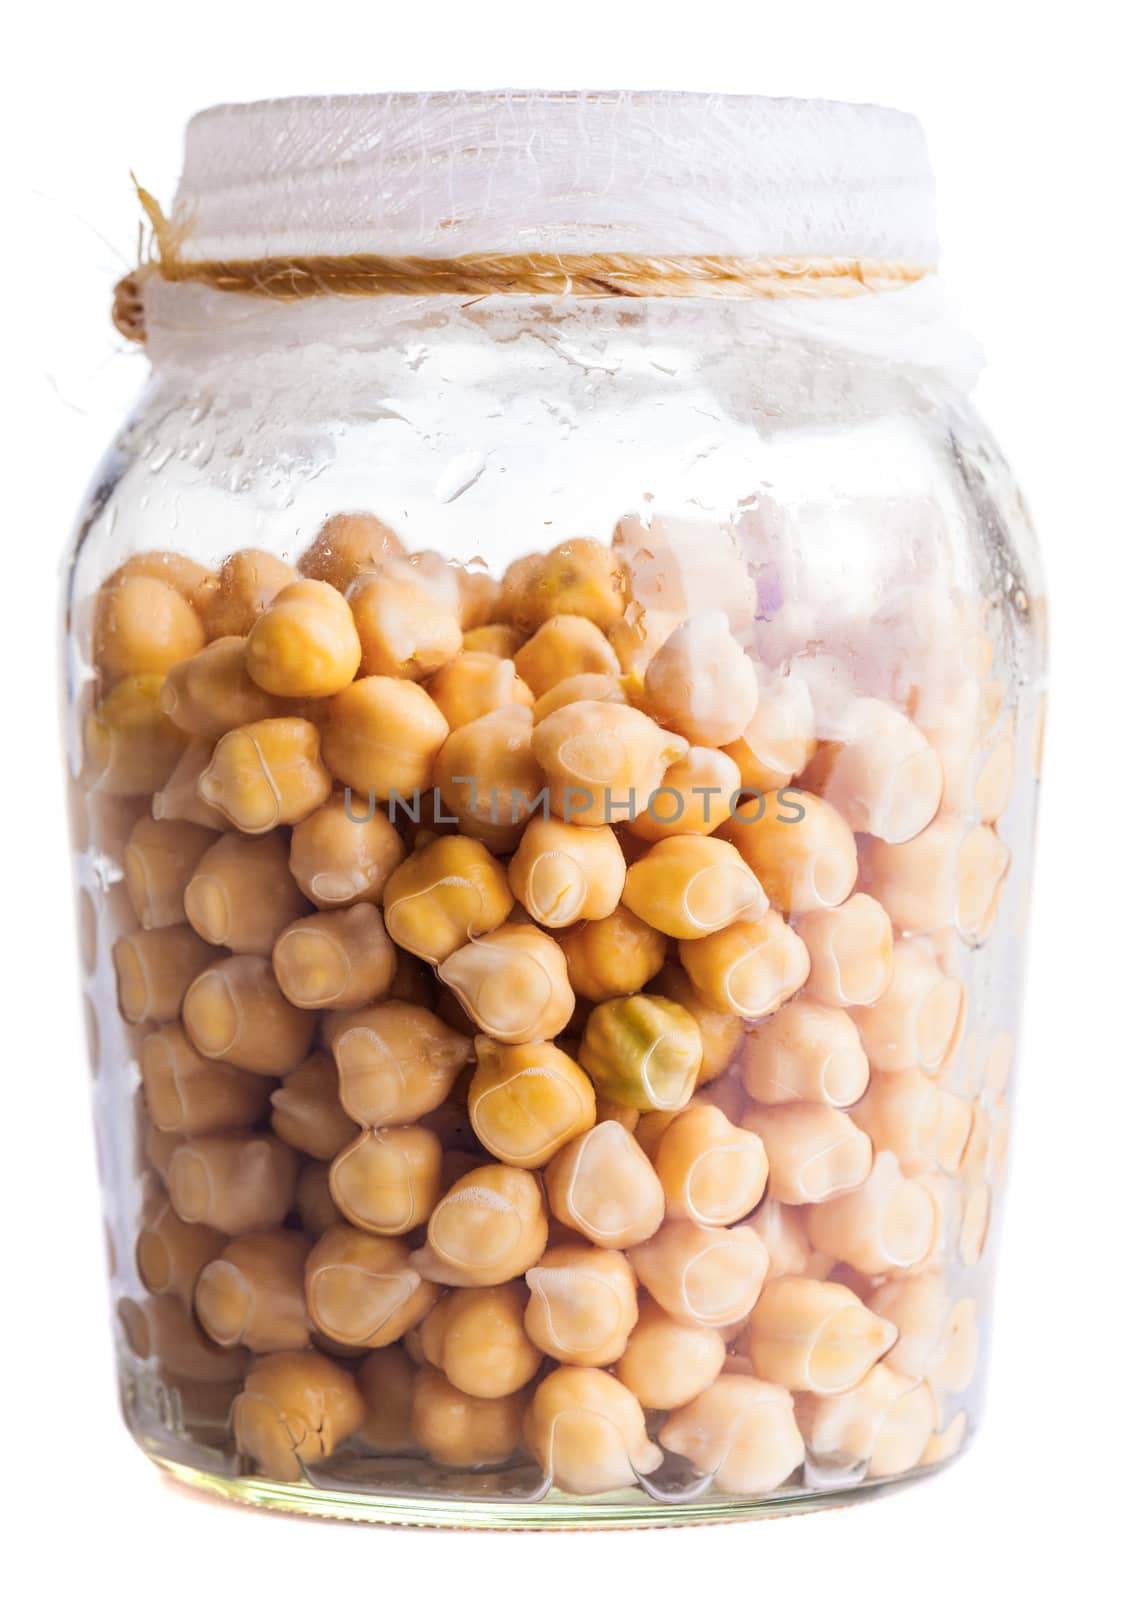 Wet Sprouting Chickpeas in a Glass Jar Isolated on White background